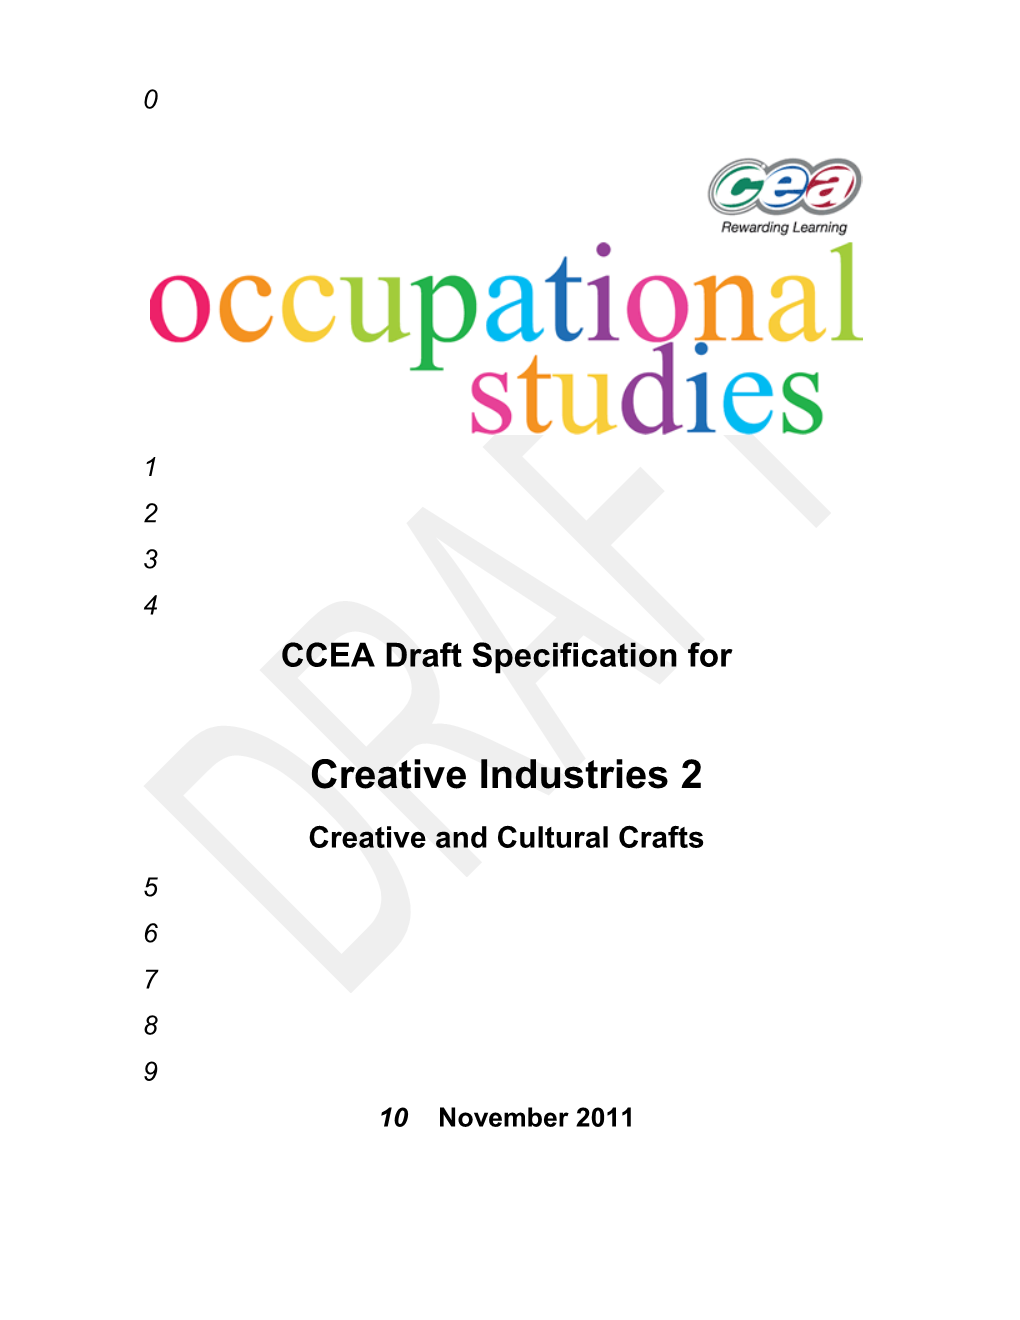 CCEA Draft Specification For